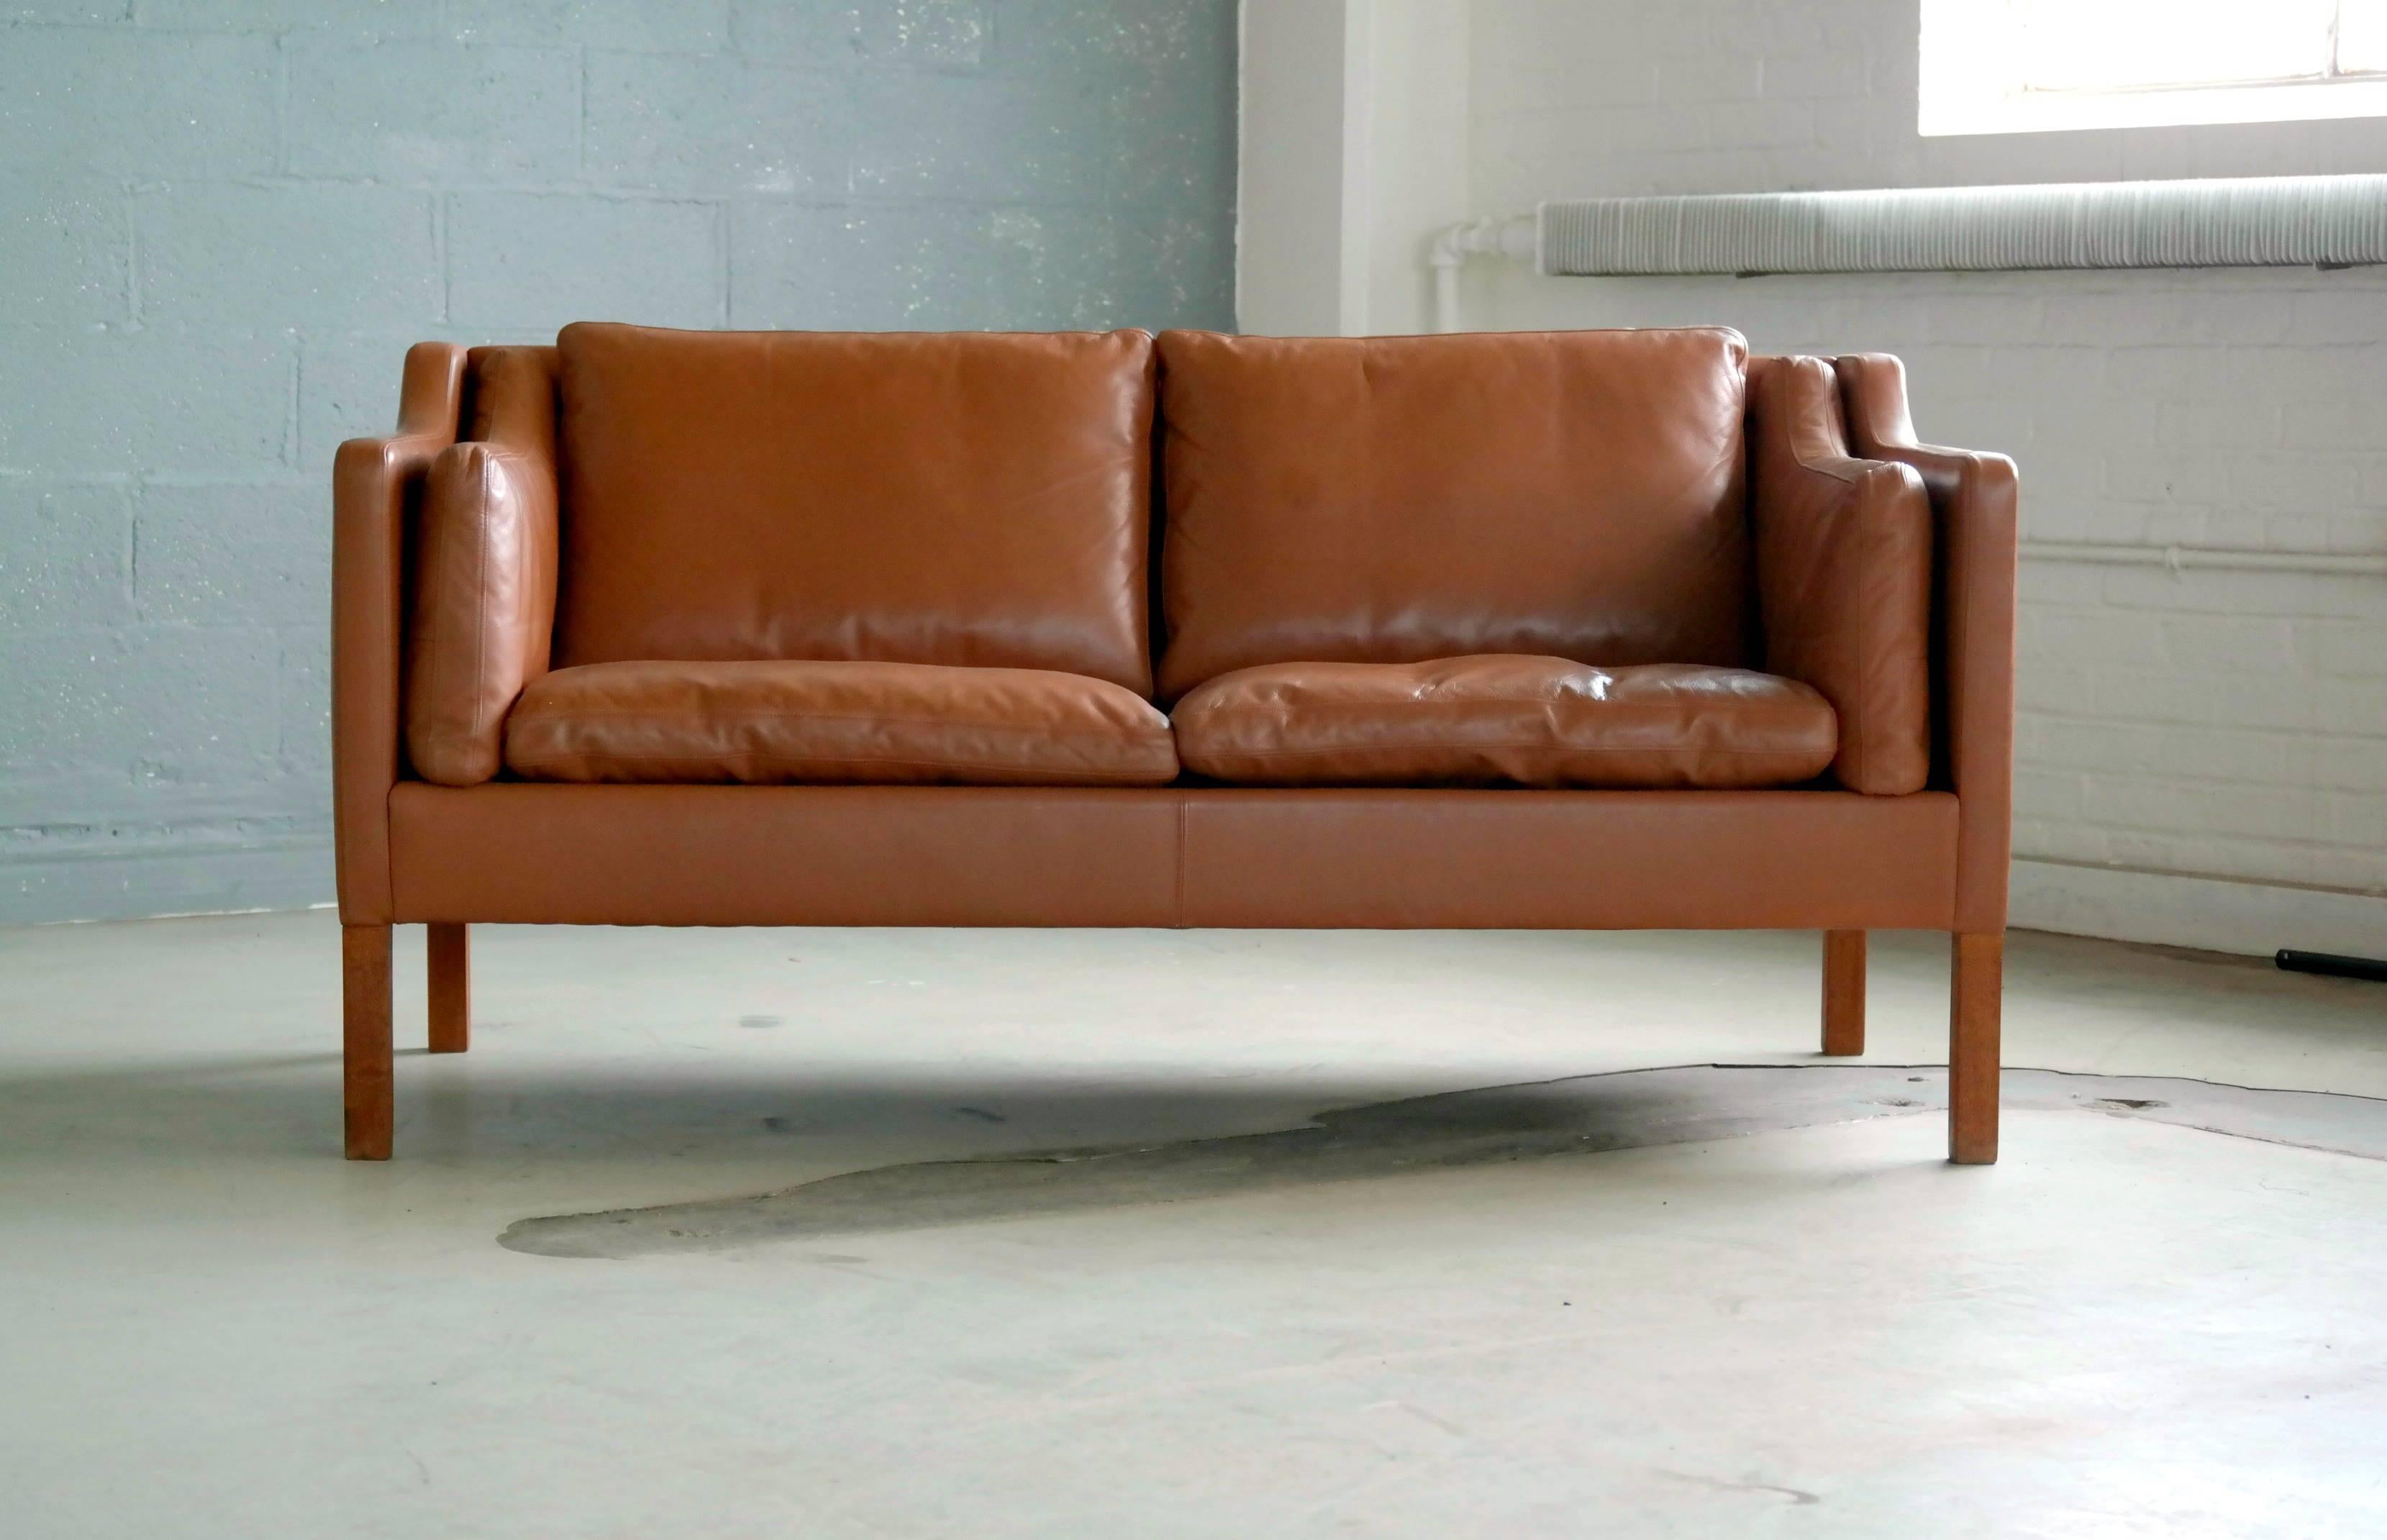 Classic two-seat sofa similar to Børge Mogensen's model 2212 in cognac leather with teak legs by Stouby Mobler, Denmark. One of the most classic, elegant and enduring designs coming out of Denmark in the midcentury era. Down filled cushions similar